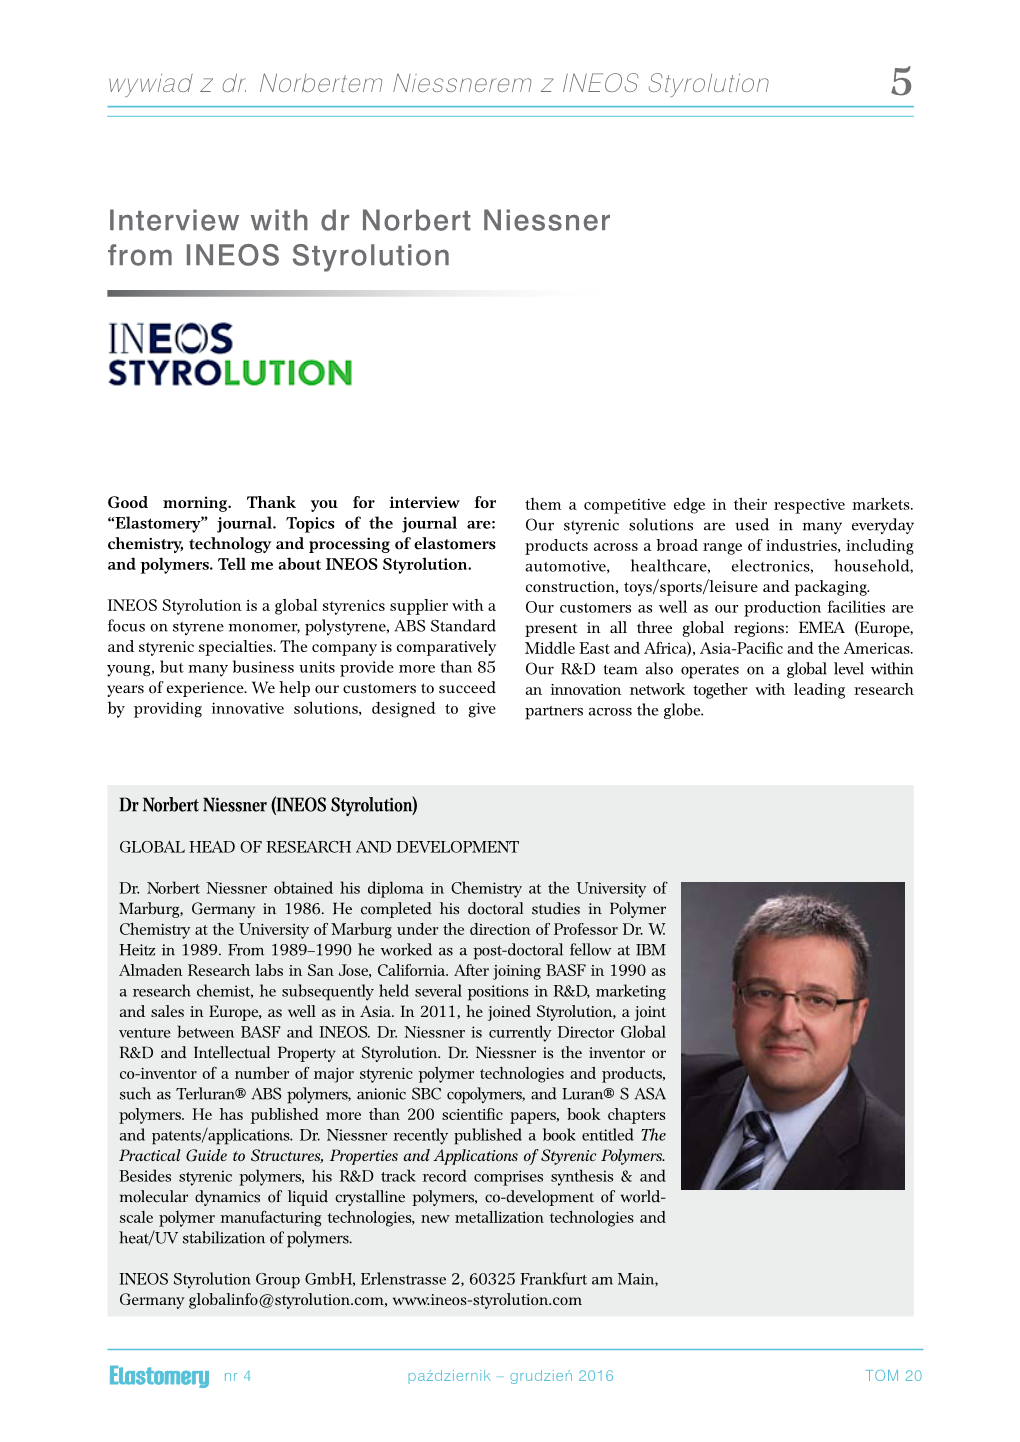 Interview with Dr Norbert Niessner from INEOS Styrolution